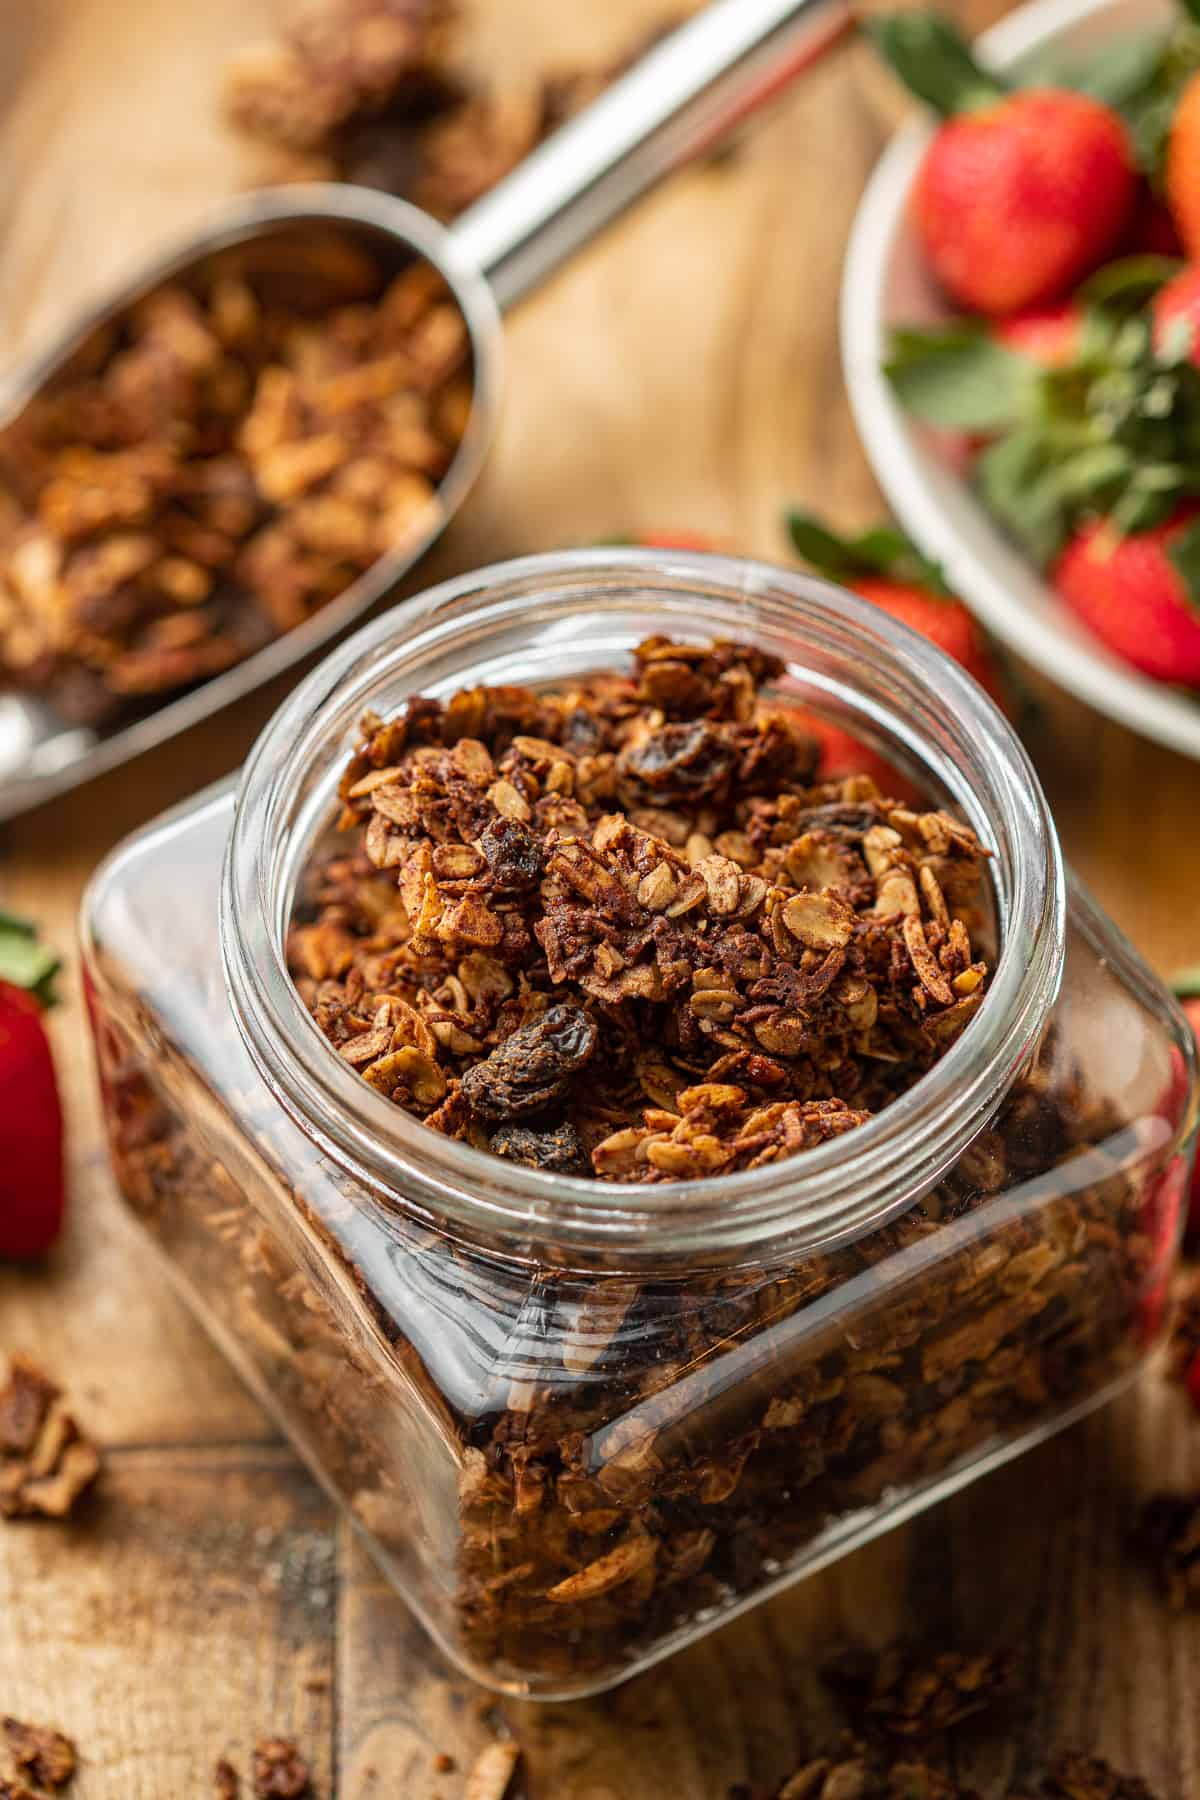 Canister of Chocolate Granola with scoop in the background.